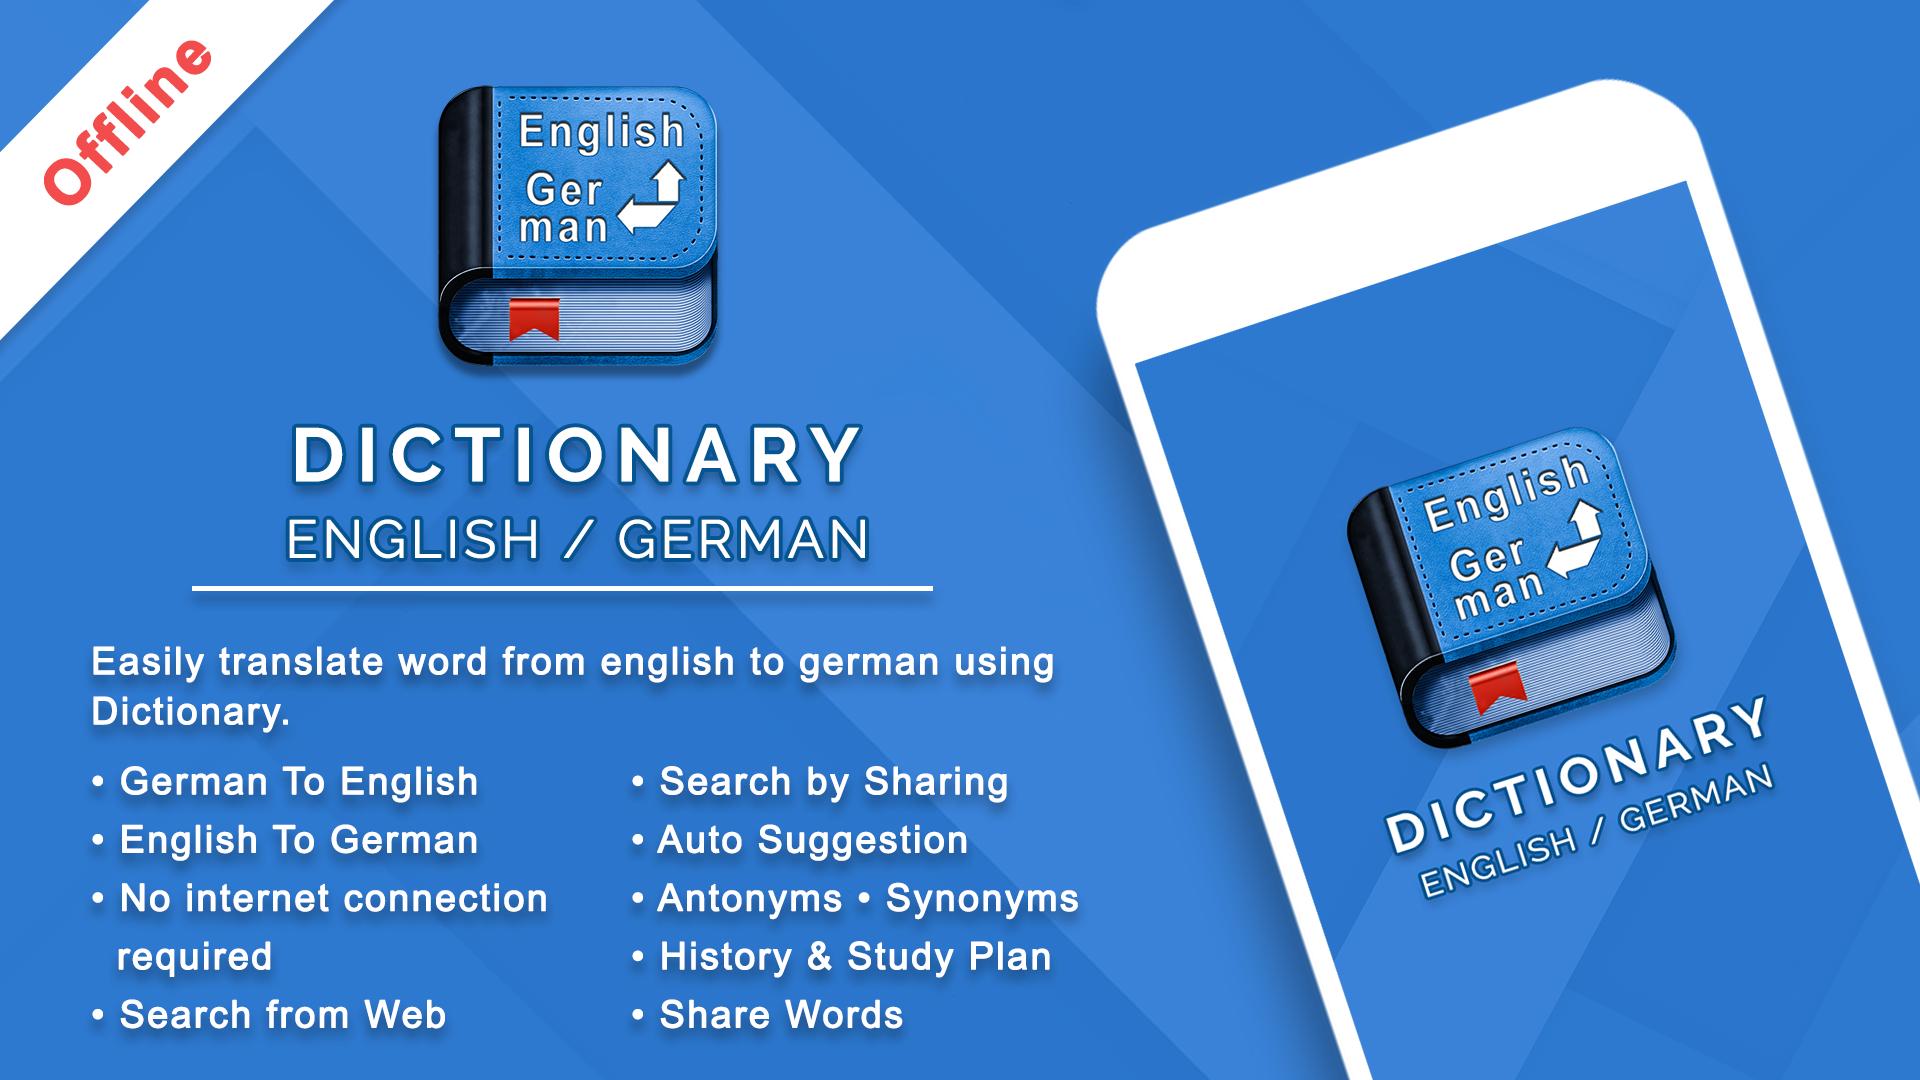 You use this dictionary